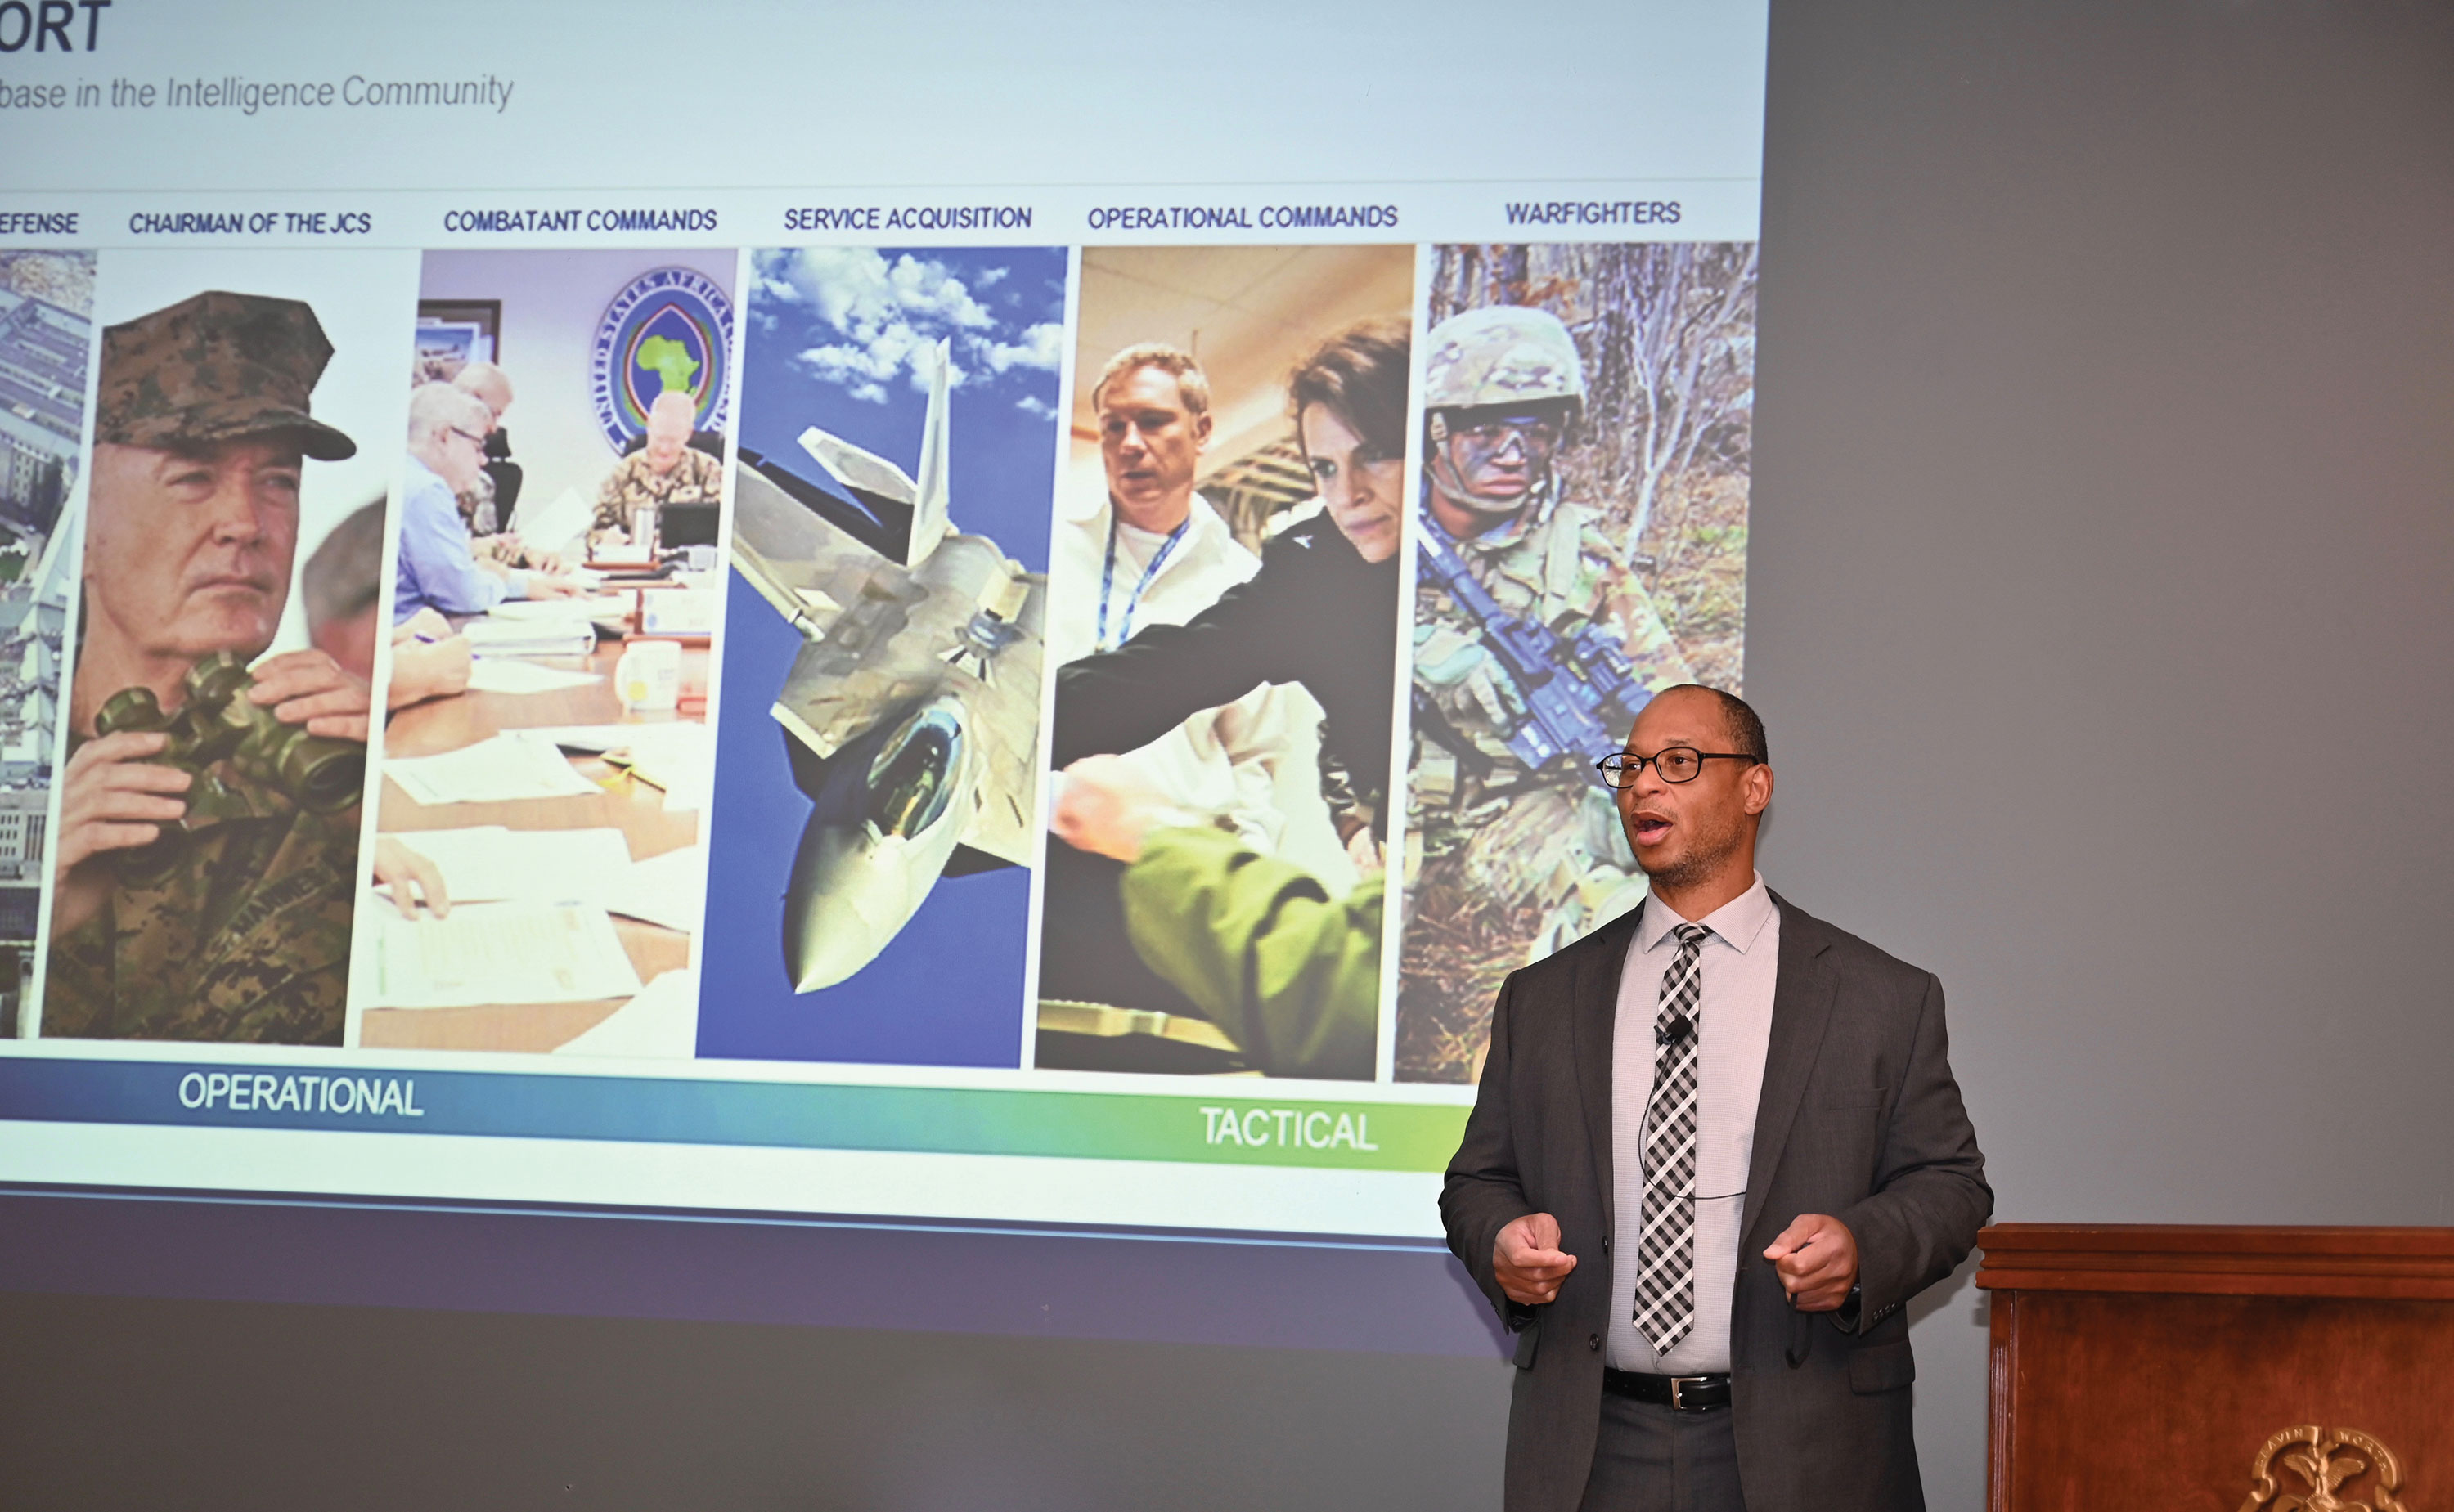 Photo of Roderic C. Jackson, the Defense Intelligence Chair and Defense Intelligence Agency (DIA) Representative to the Combined Arms Center and Army University, delivering the Dec. 10, 2019 lecture in the Interagency Brown-Bag Lecture Series.